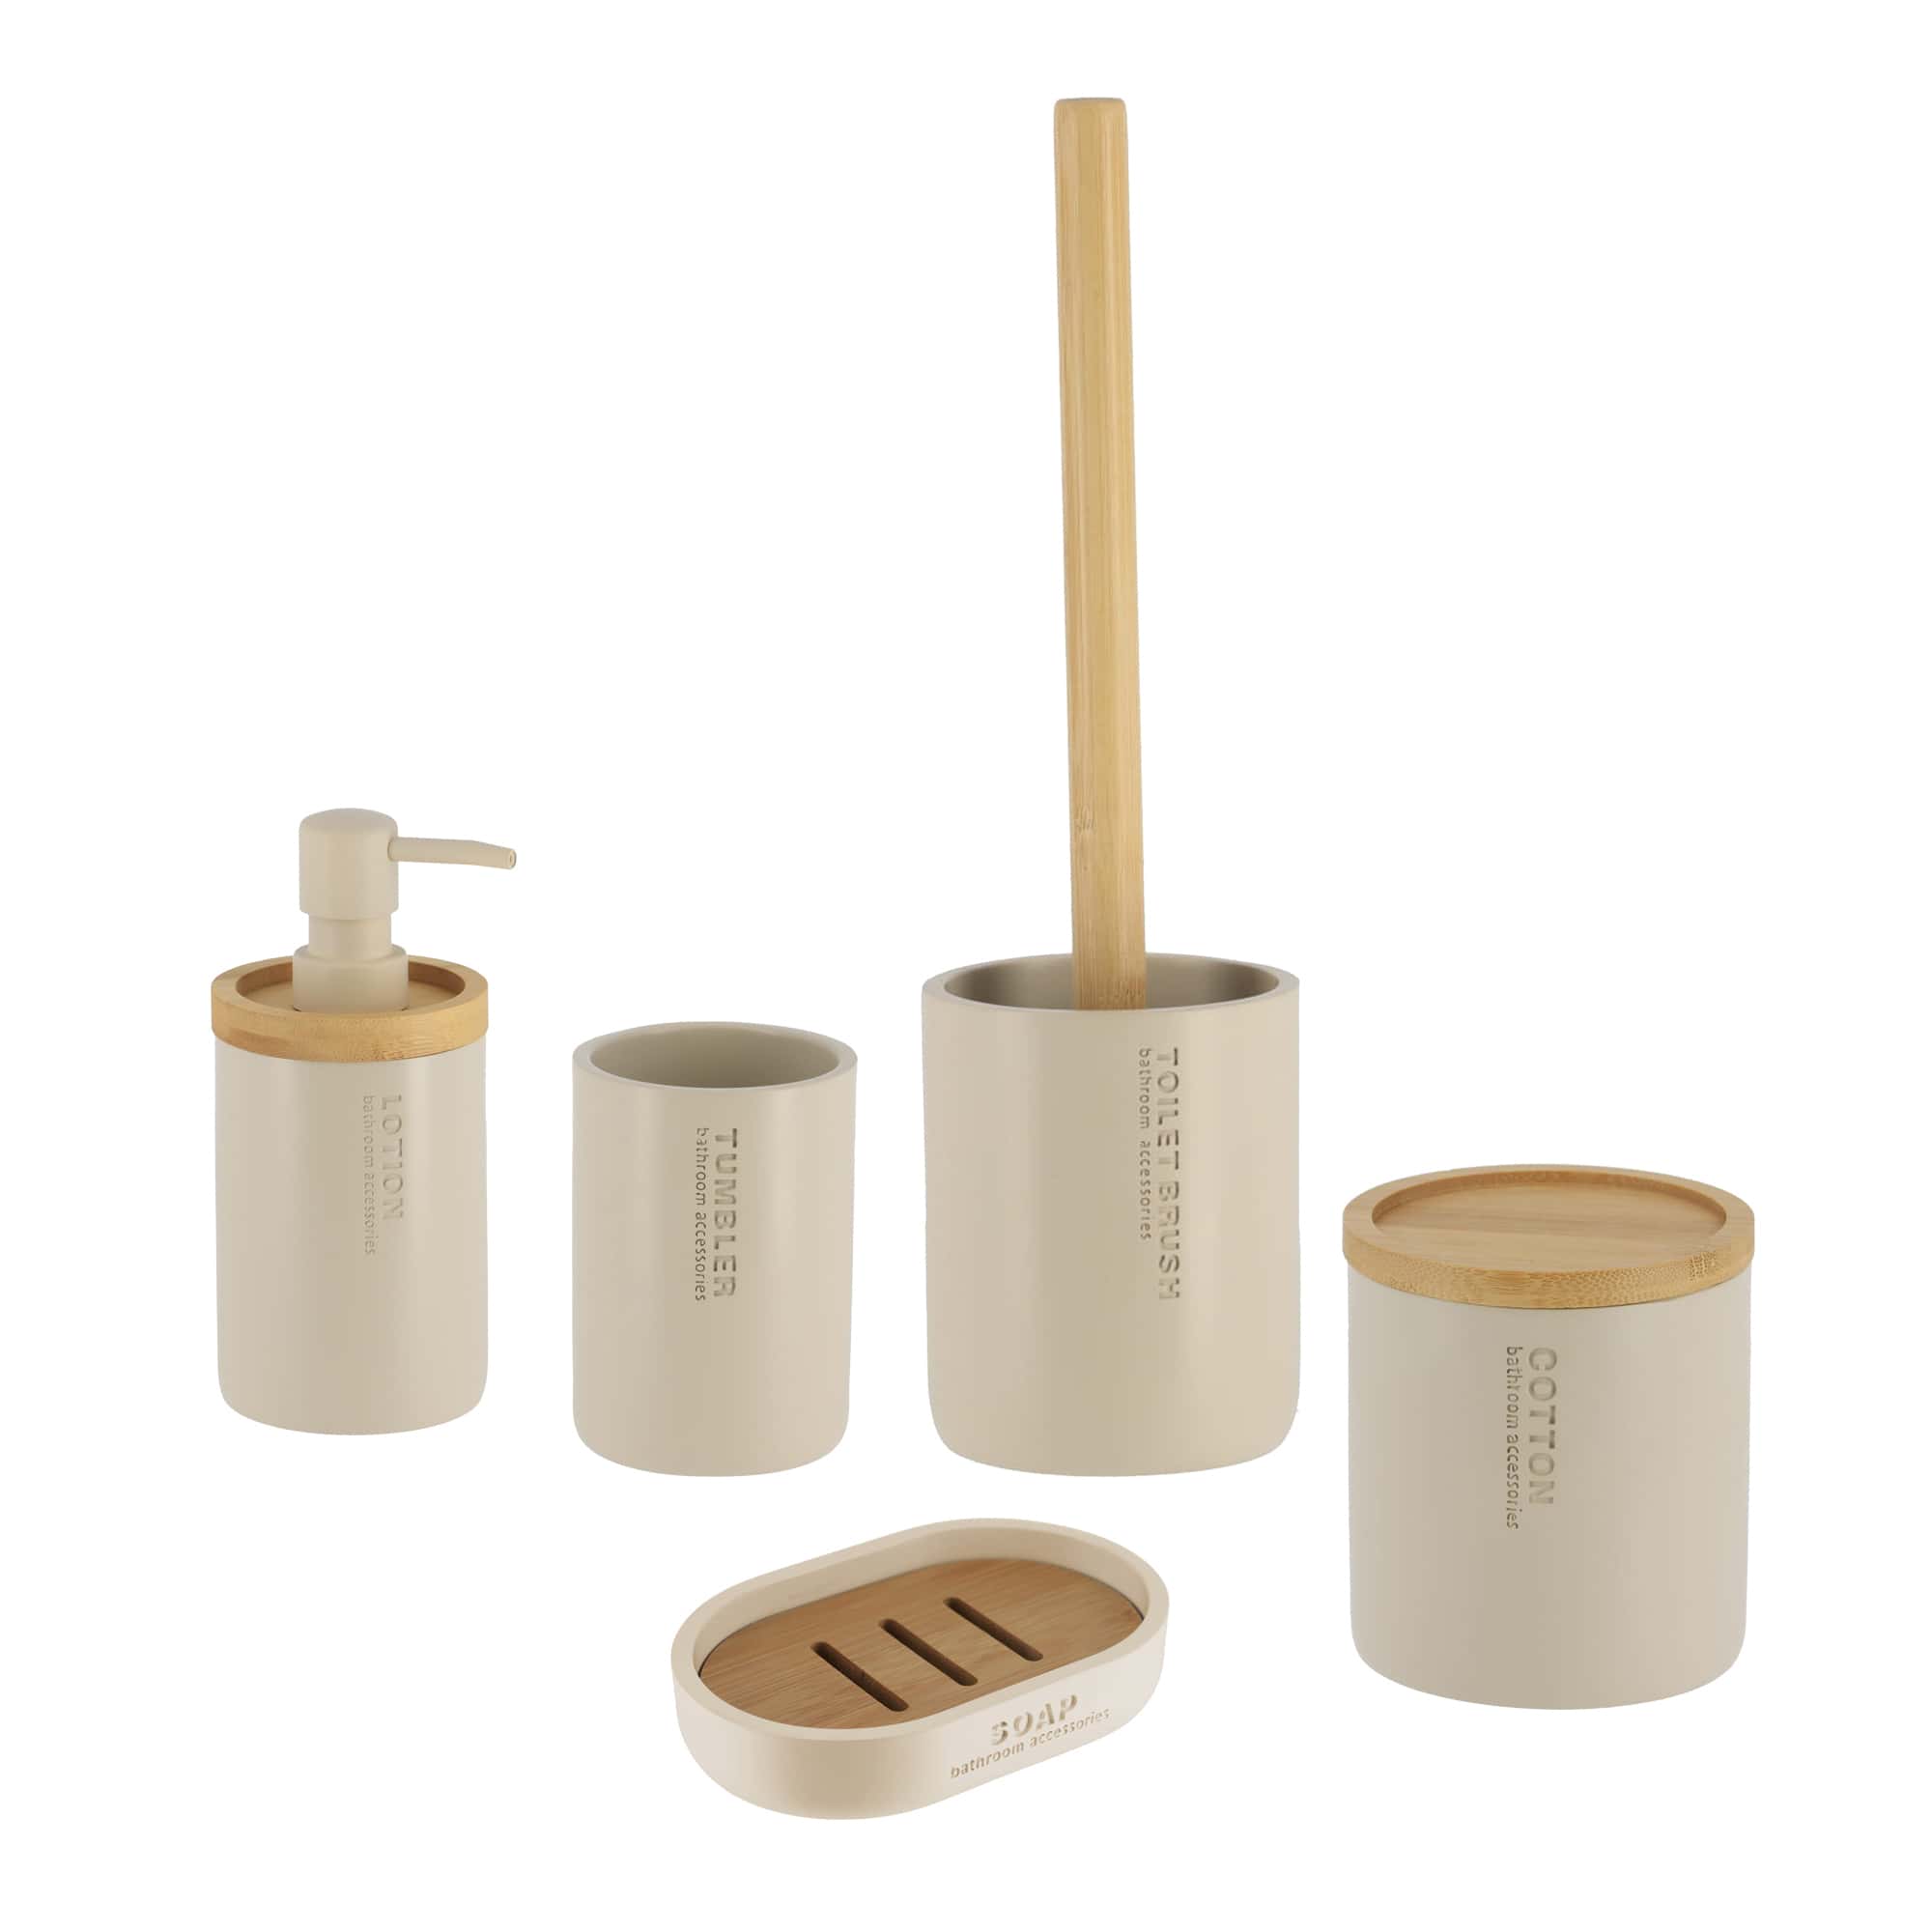 Chic Beige Bathroom Essentials Set with Natural Bamboo 5 pieces Liquid Soap Pump, Toothbrush Cup, Toilet Brush Holder, Cotton Container and Soap Holder